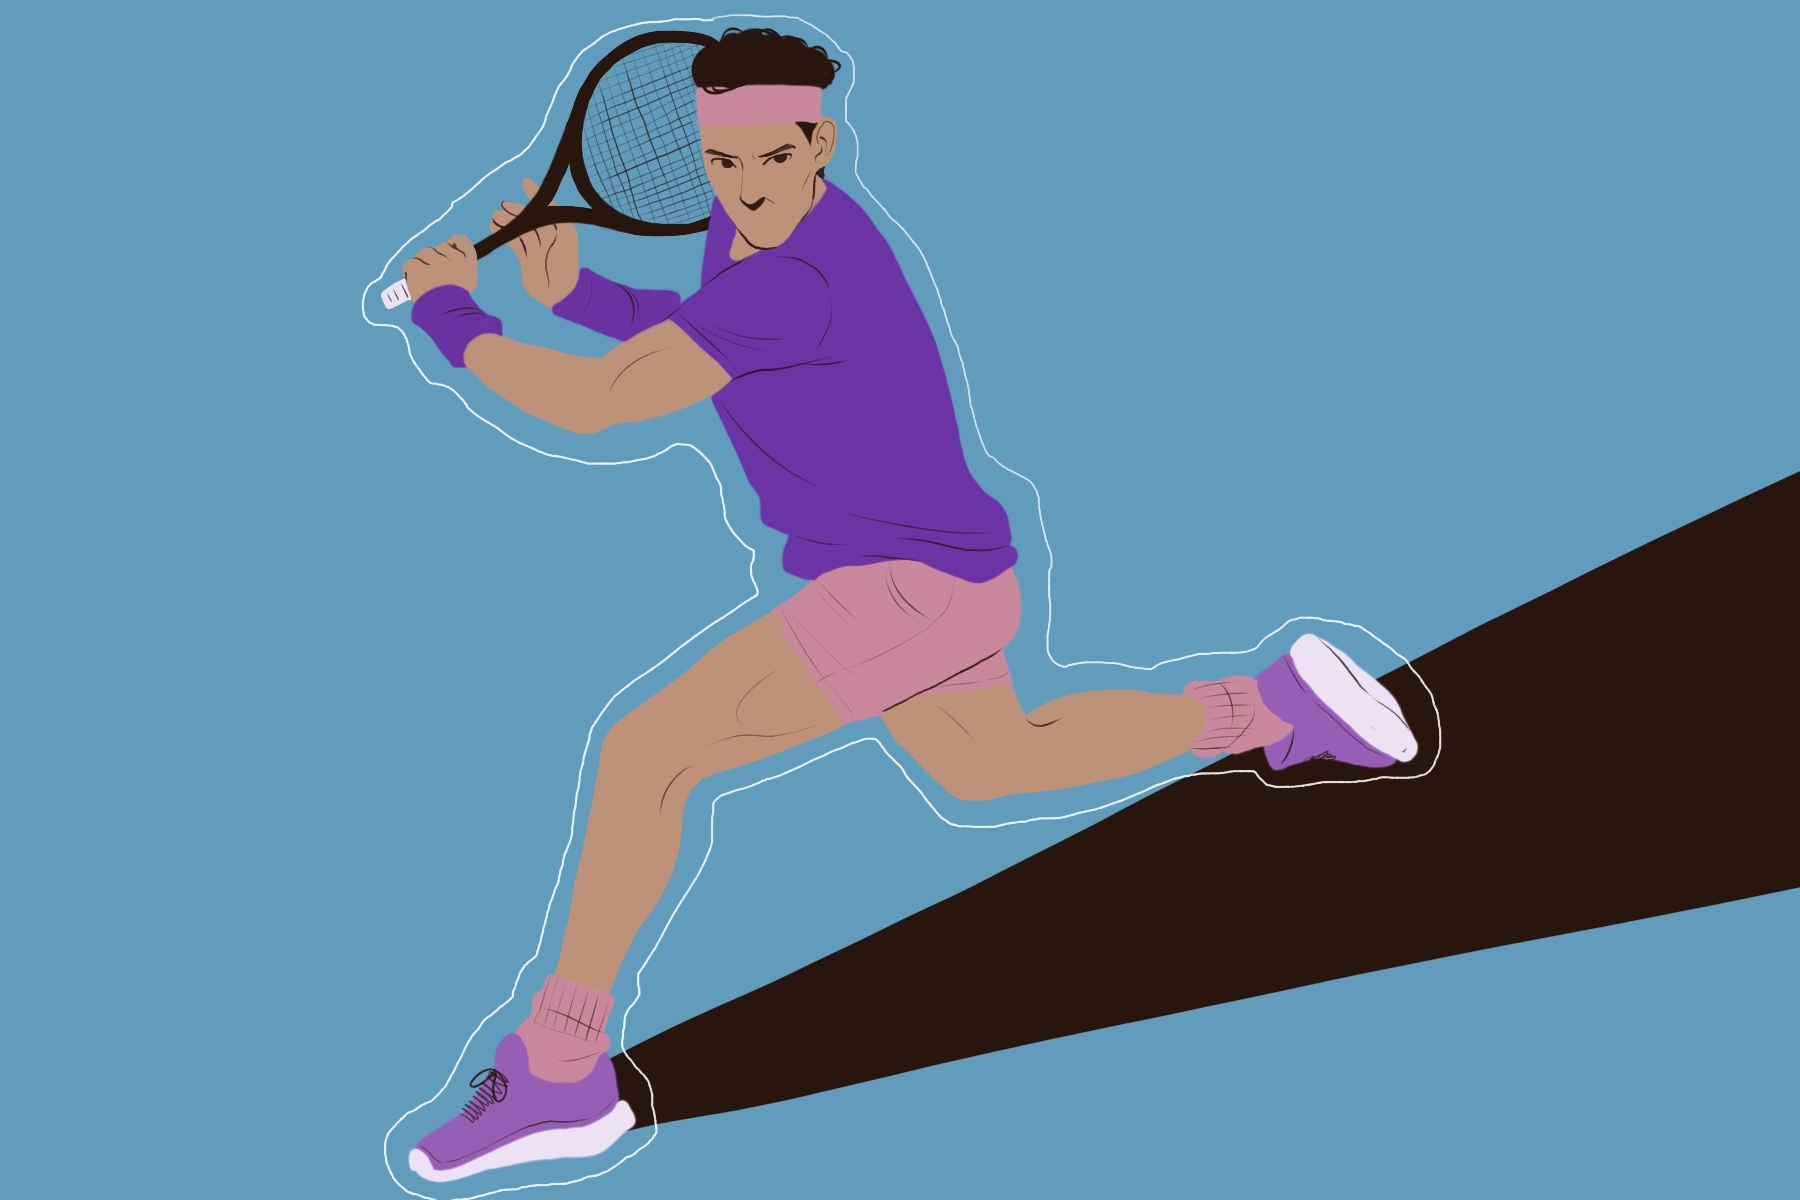 A drawing of Rafael Nadal shows the athlete swinging a tennis racket.